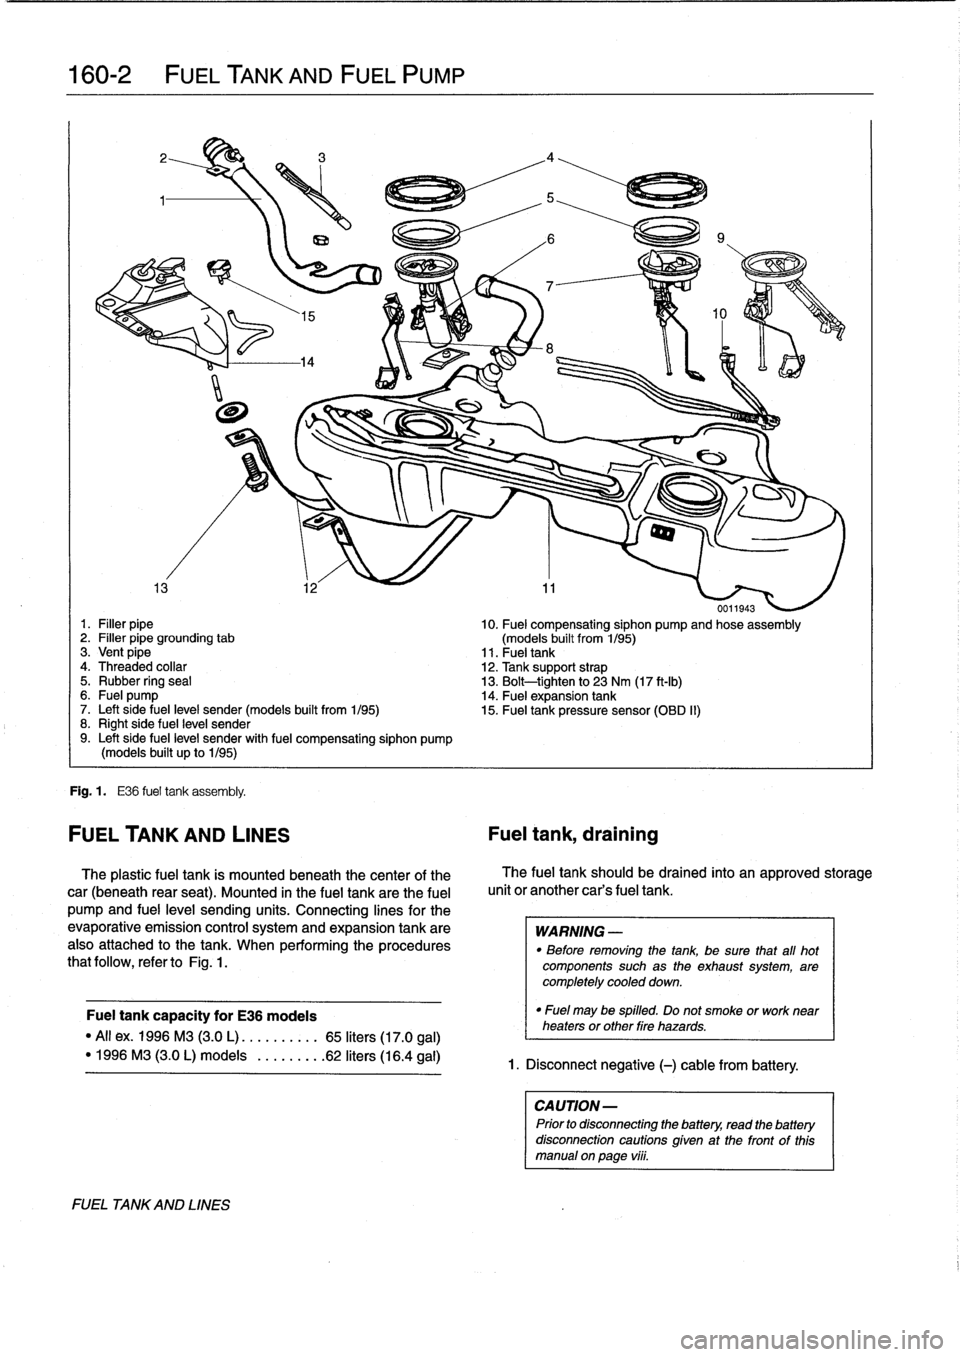 BMW 318i 1995 E36 Workshop Manual 
160-2

	

FUEL
TANK
AND
FUEL
PUMP

0011943
1
.
Filler
pipe

	

10
.
Fuel
compensating
siphon
pump
and
hose
assembly
2
.
Filler
pipe
grounding
tab

	

(models
built
from
1/95)
3
.
Vent
pipe

	

11
.
F